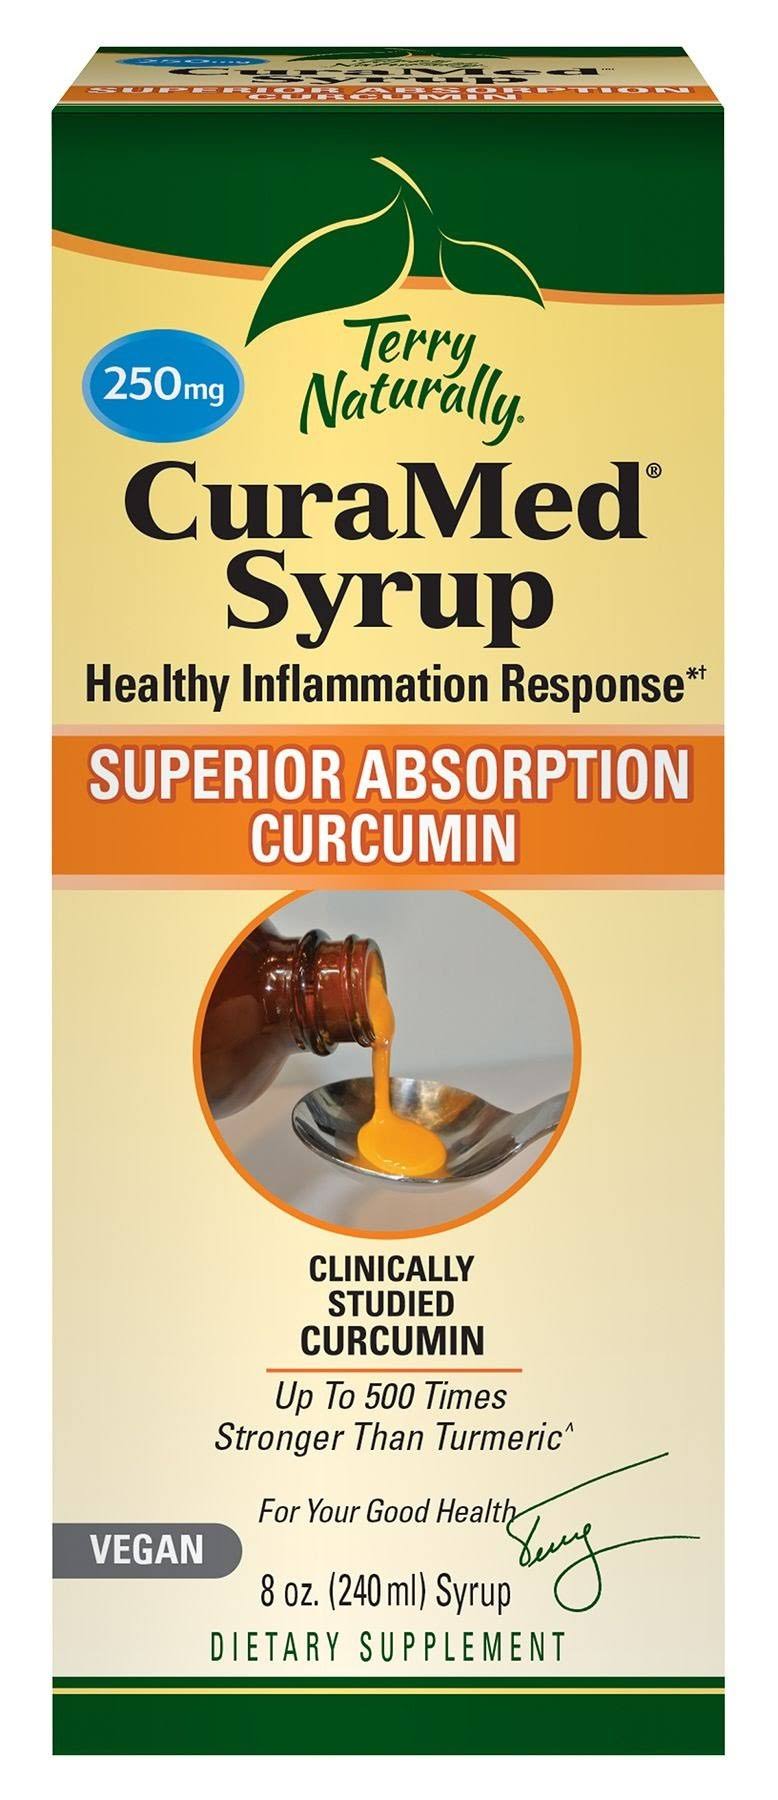 Terry Naturally CuraMed Syrup 250 mg - 8 fl oz